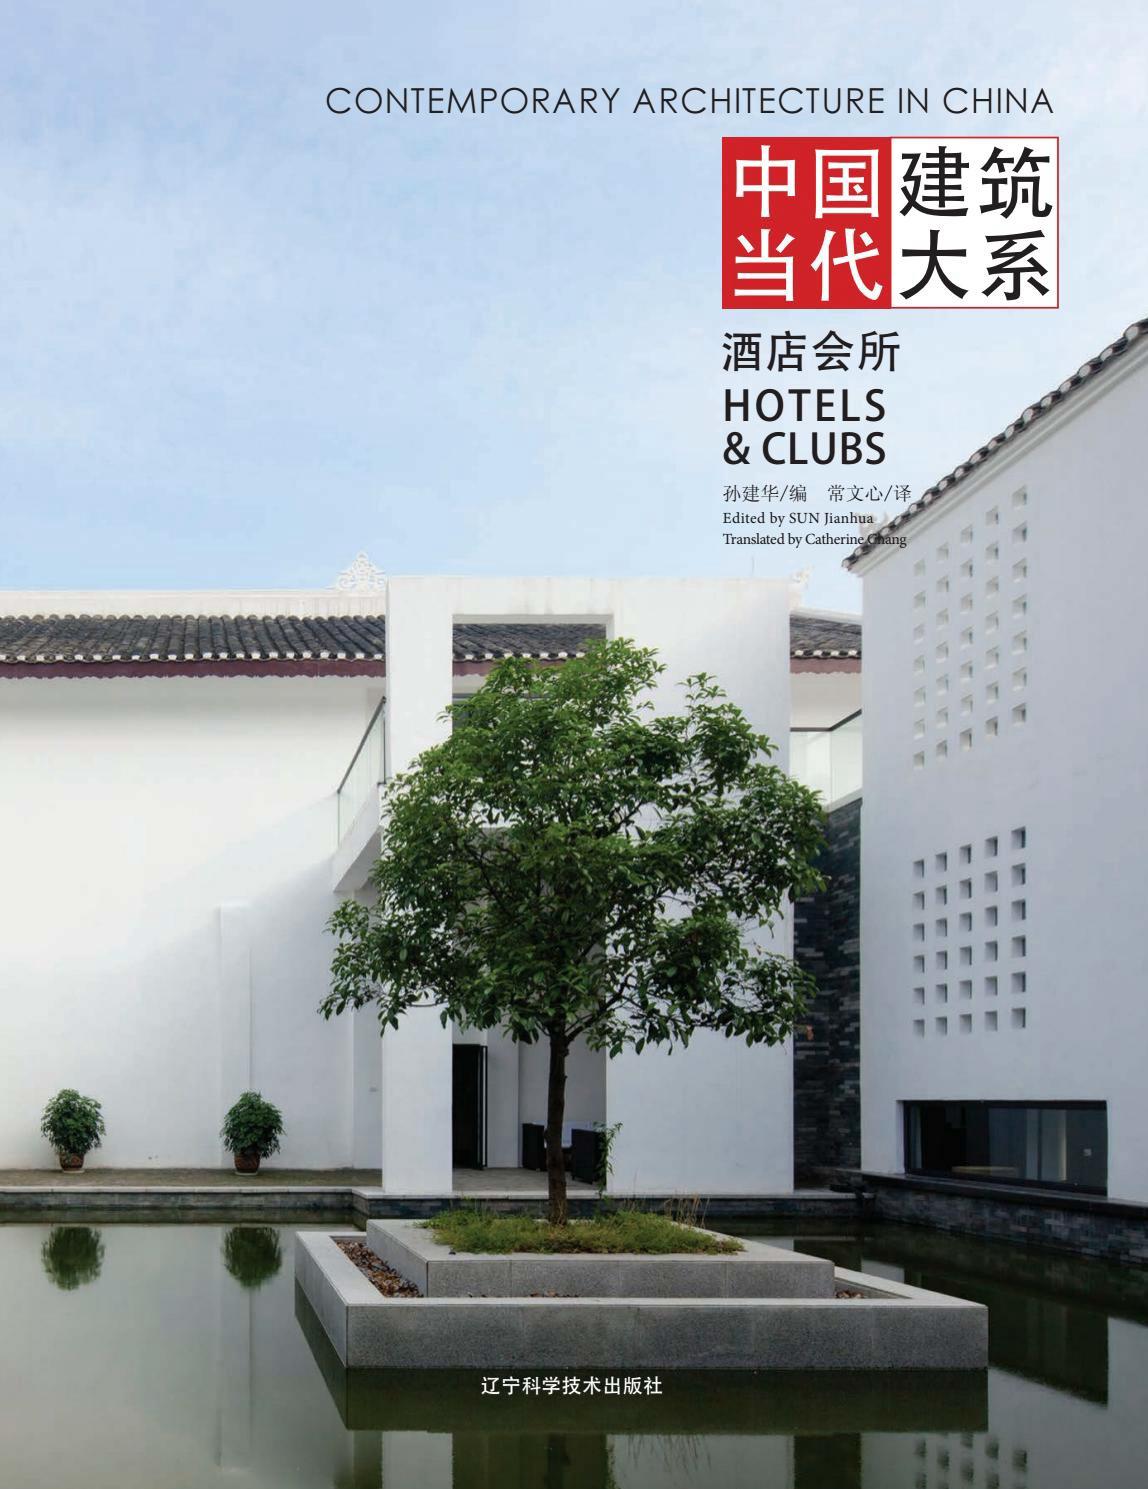 Contemporary Architecture In China – Hotels and Clubs